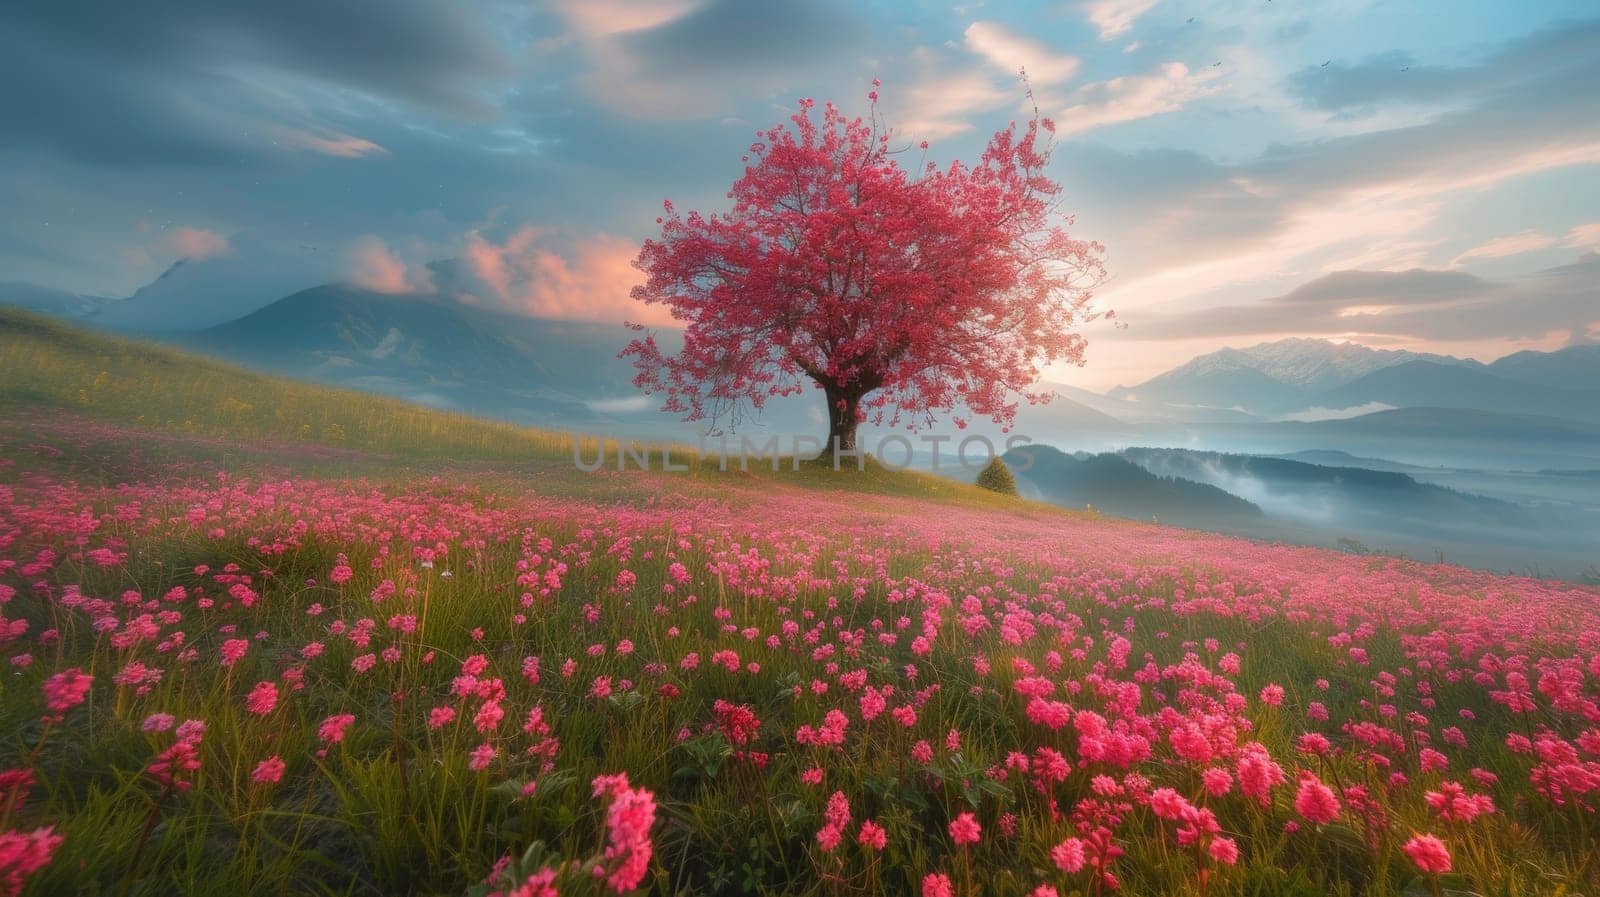 A lone tree in a field of pink flowers with mountains behind